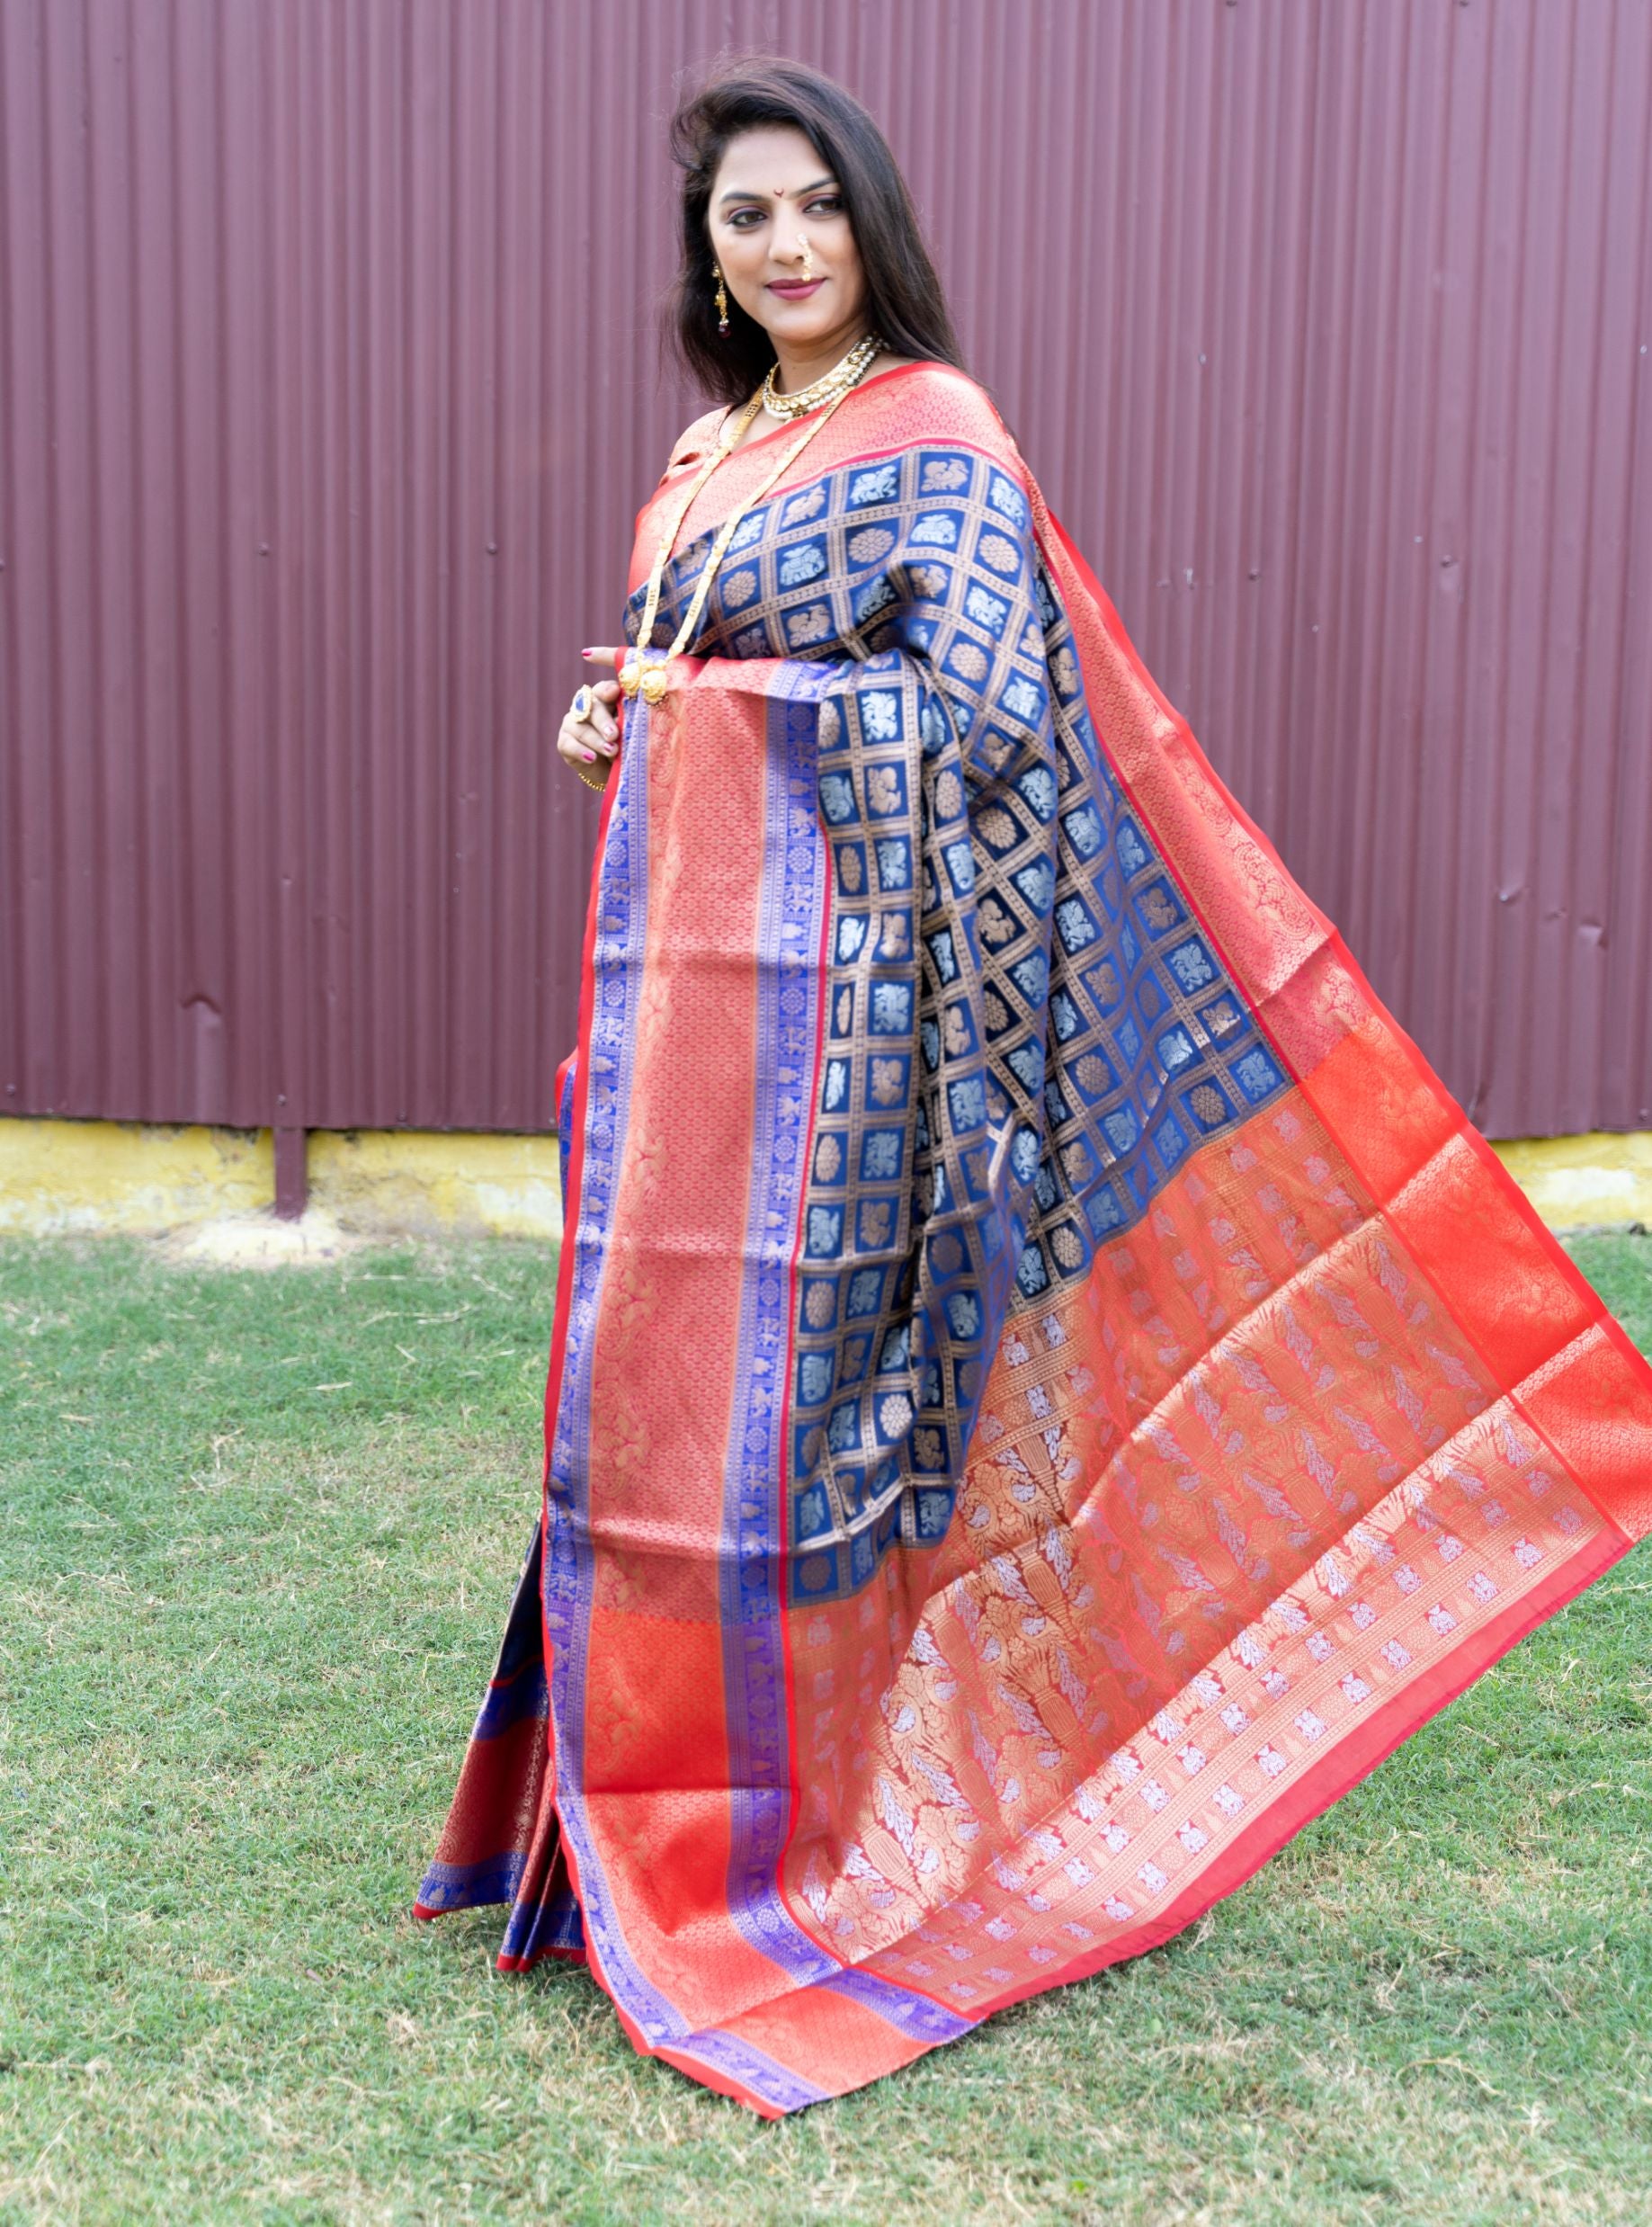 Navy blue Color Beautiful Design Kanchipuram Saree With Silver And Gold Zari Weaving Work and Blouse Pis